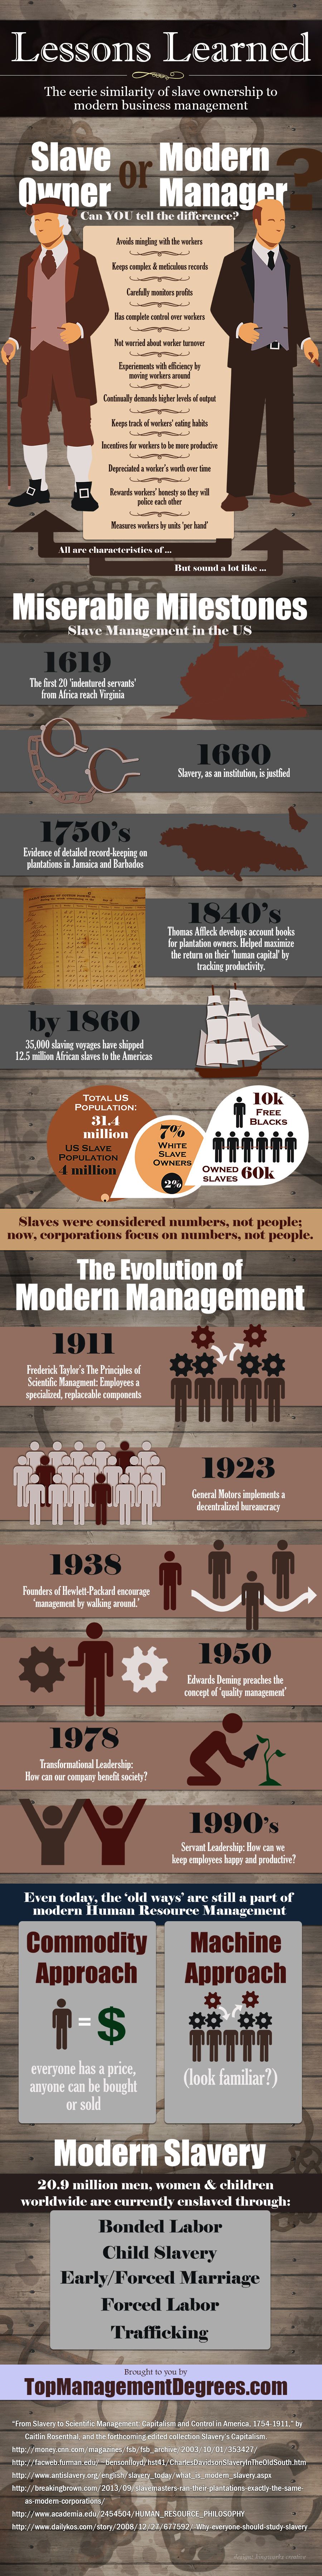 Slave Owners vs. Modern Management: Can You Tell the Difference? [Infographic]